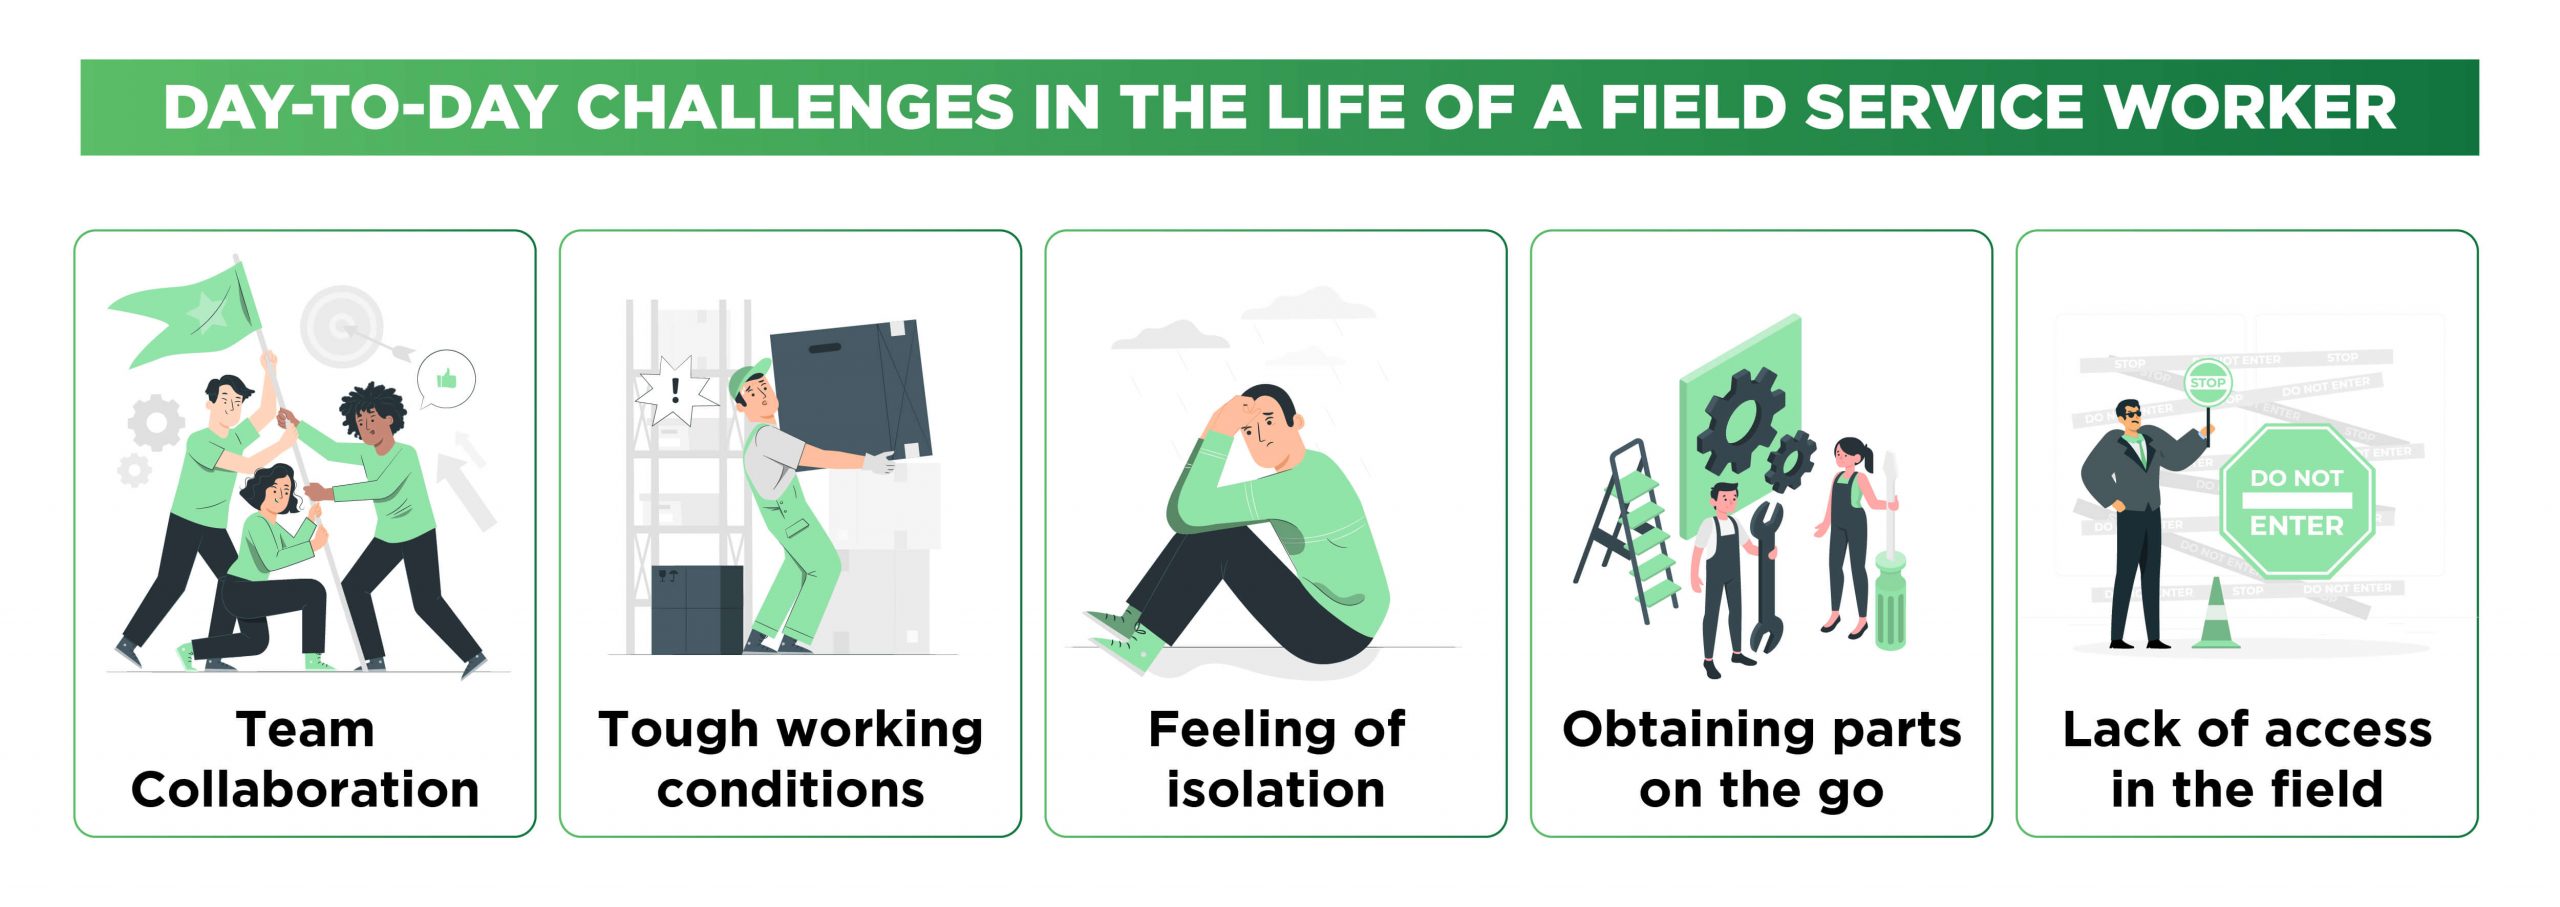 Challenges in the life of field service worker - i4T Global